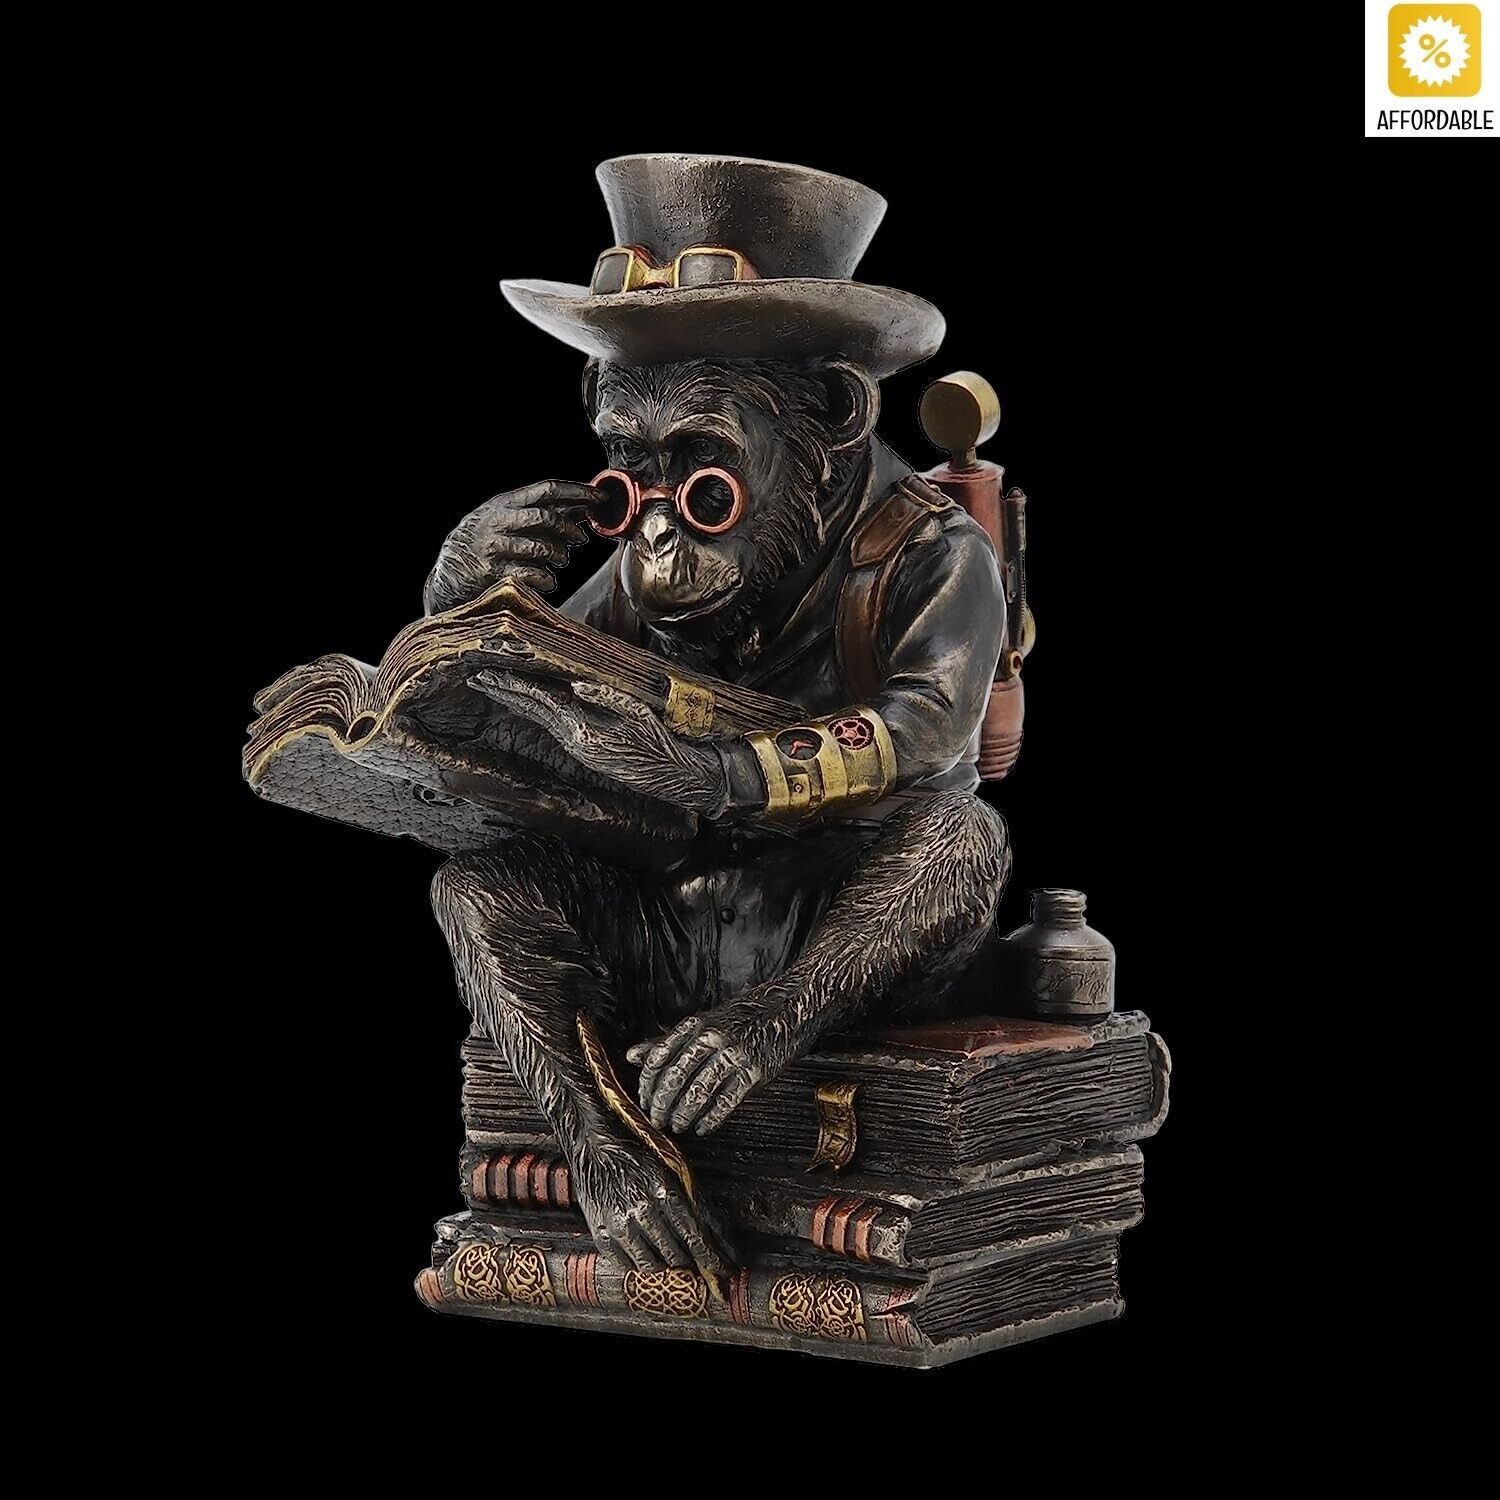 Steampunk Chimpanzee Scholar VERONESE Figurine Hand Painted Great For A Gift